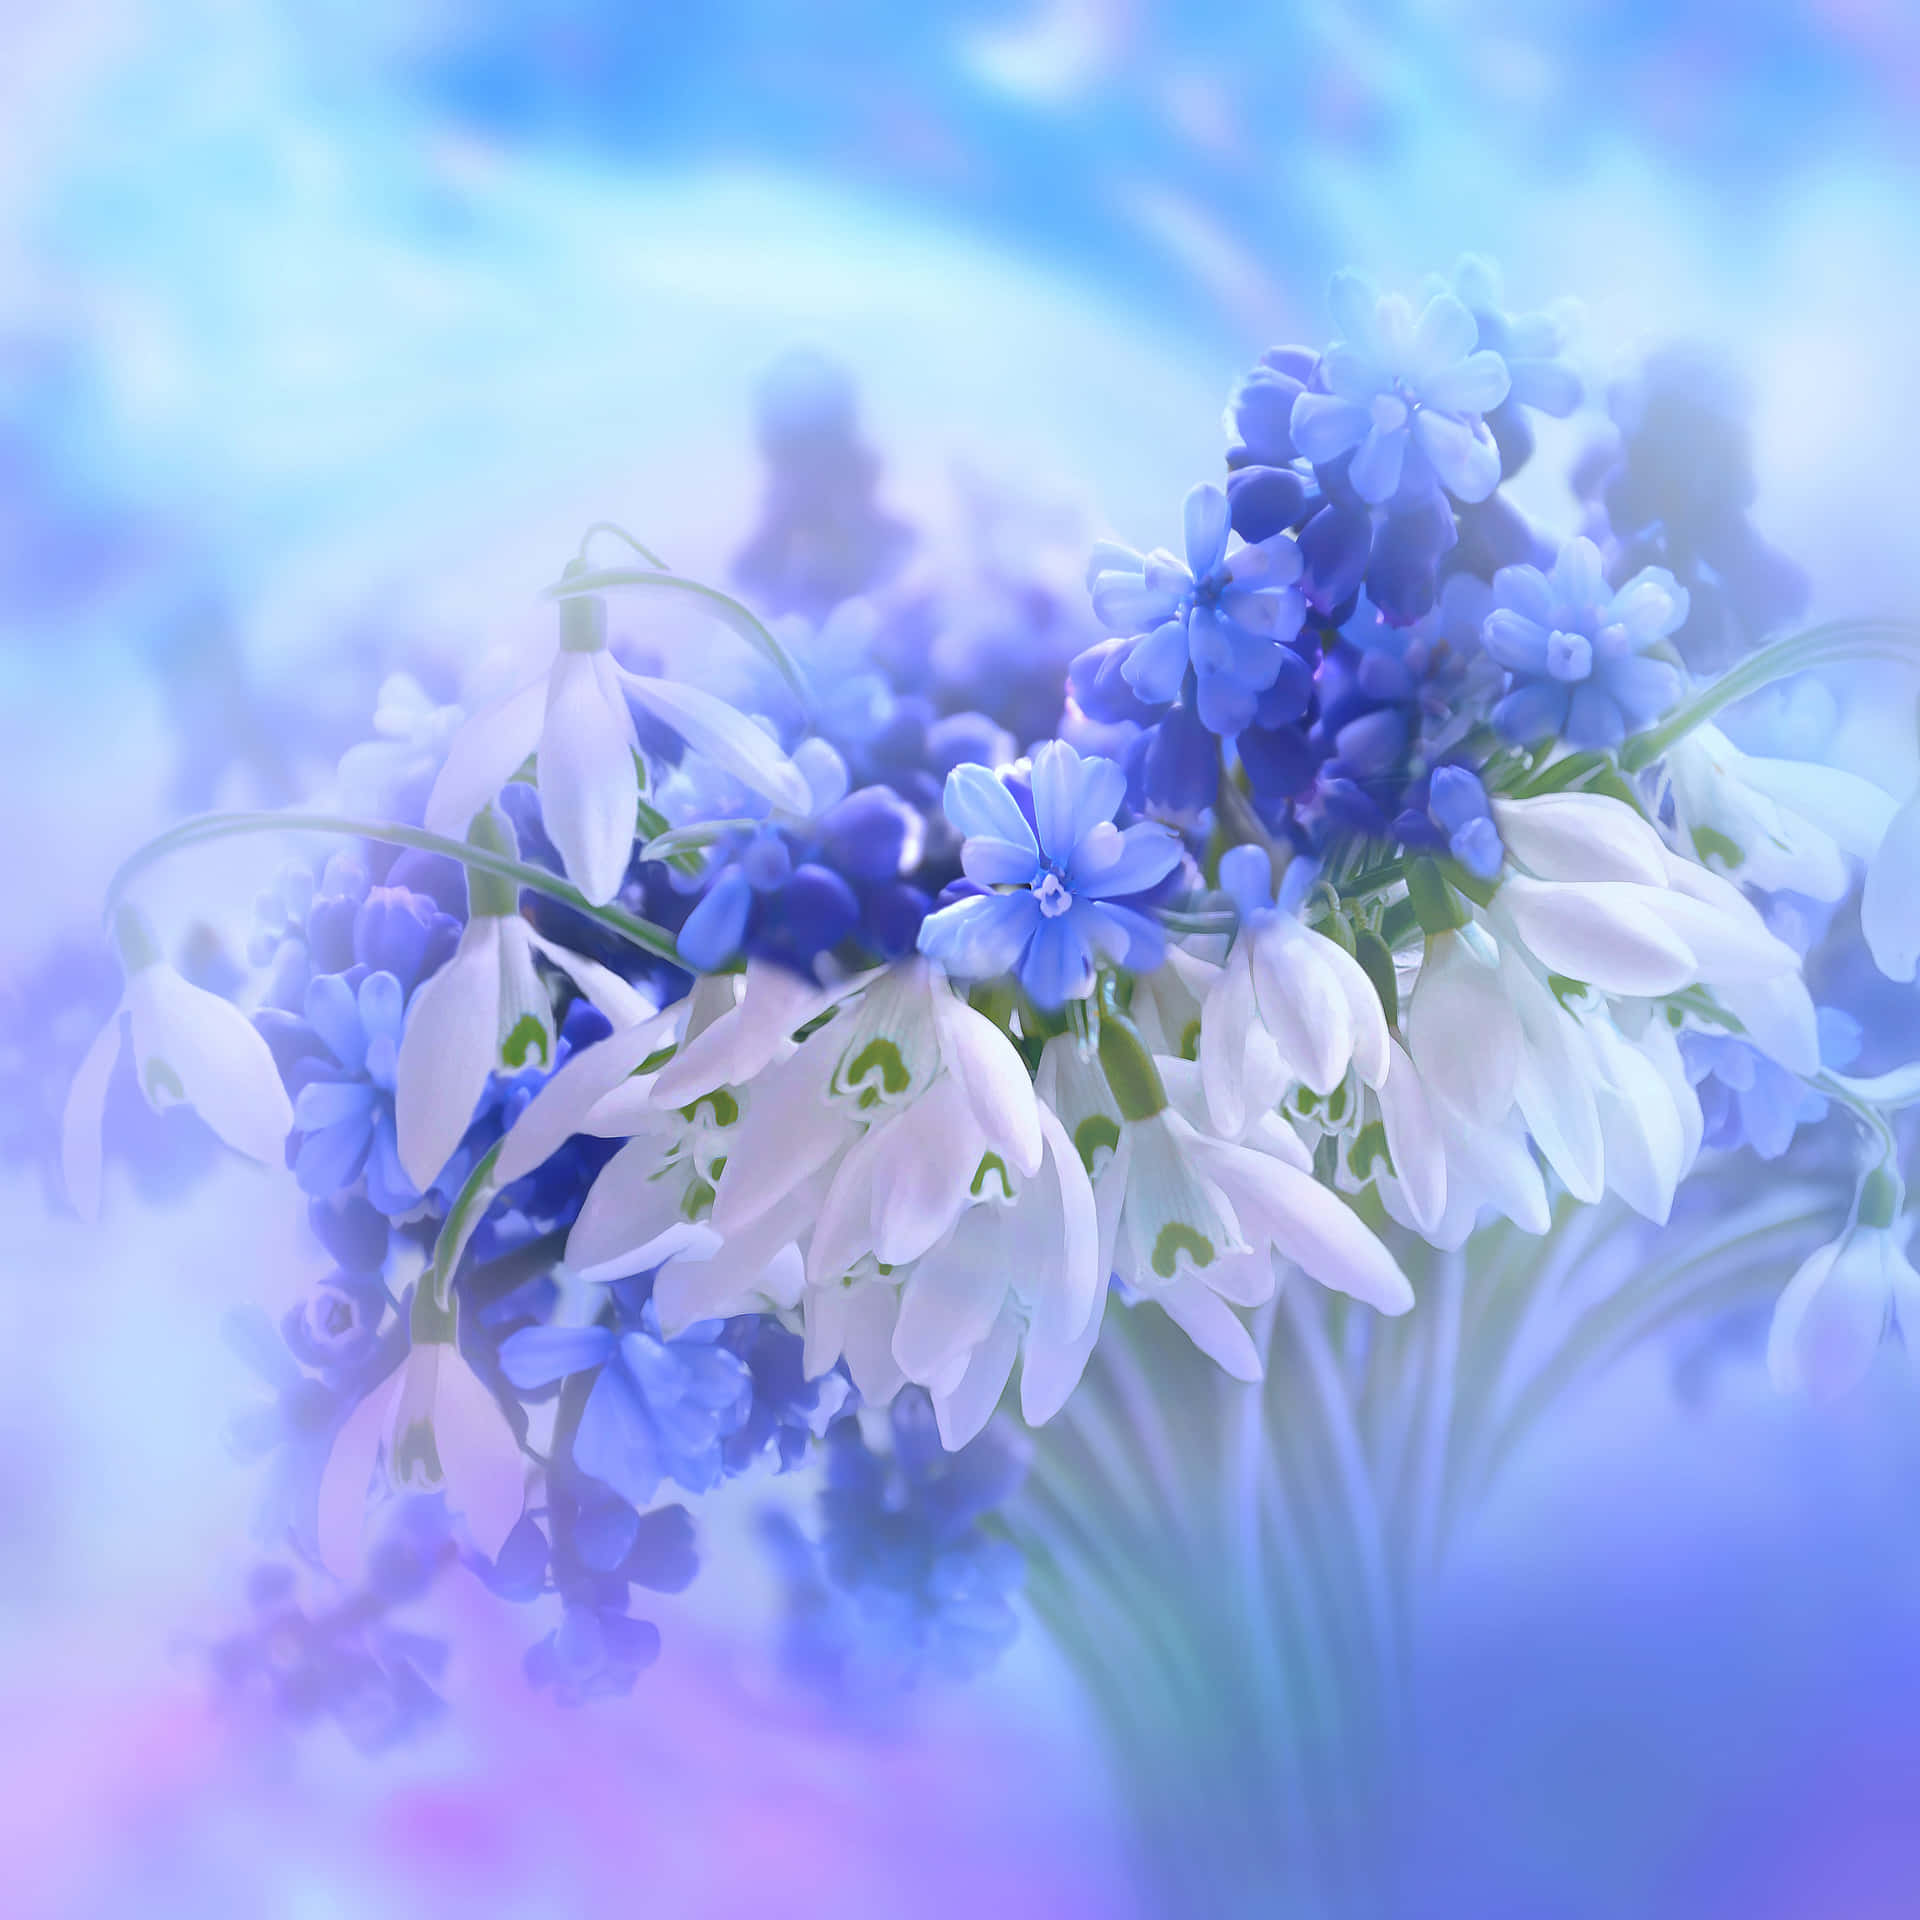 Flowers Nature Blue And White Wallpaper